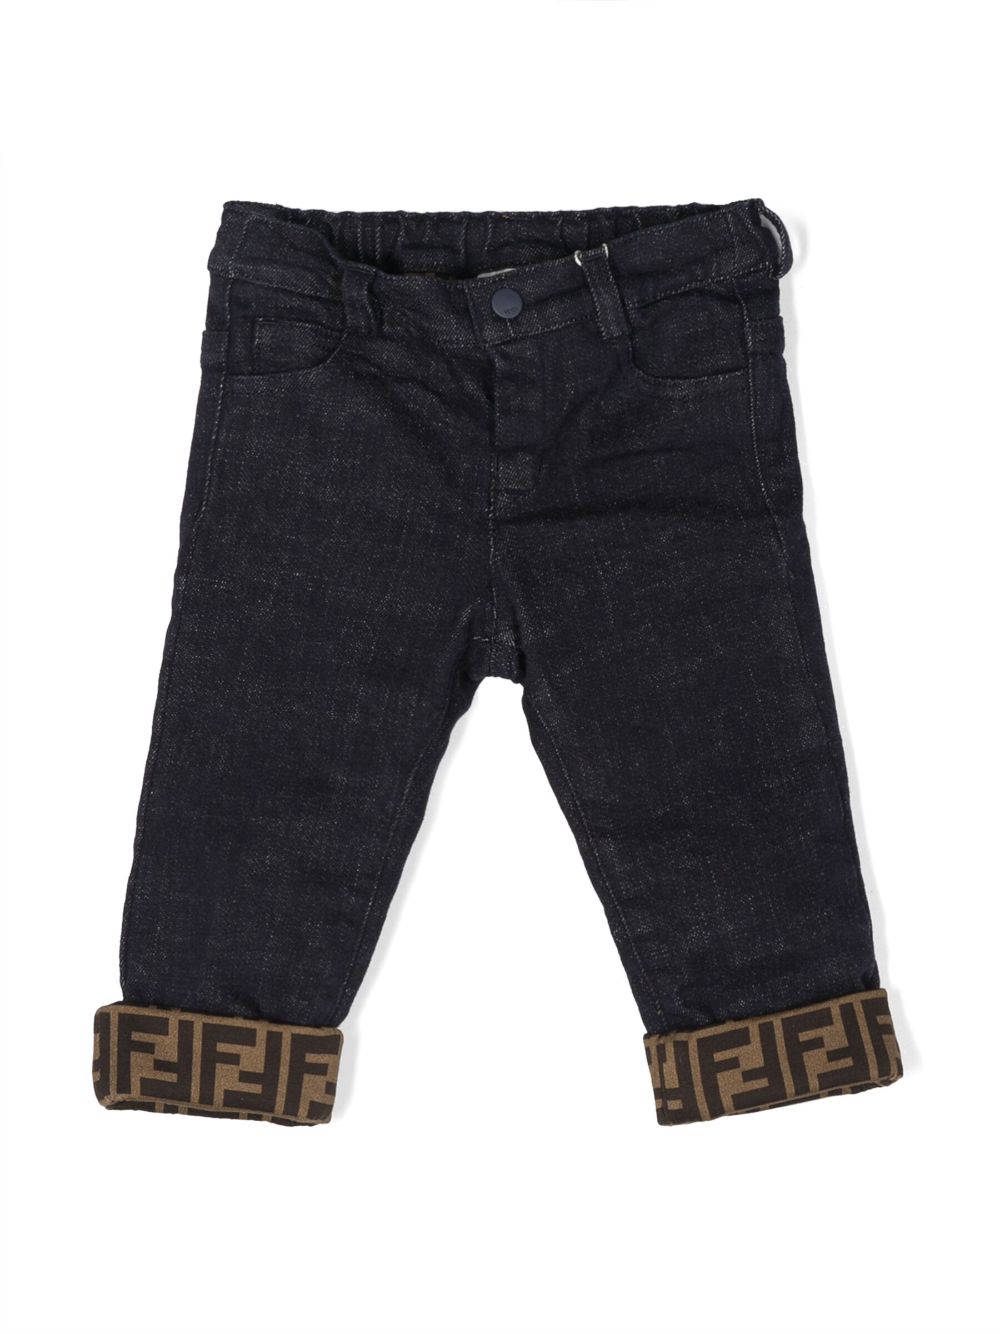 Midnight blue jeans for newborns with logo